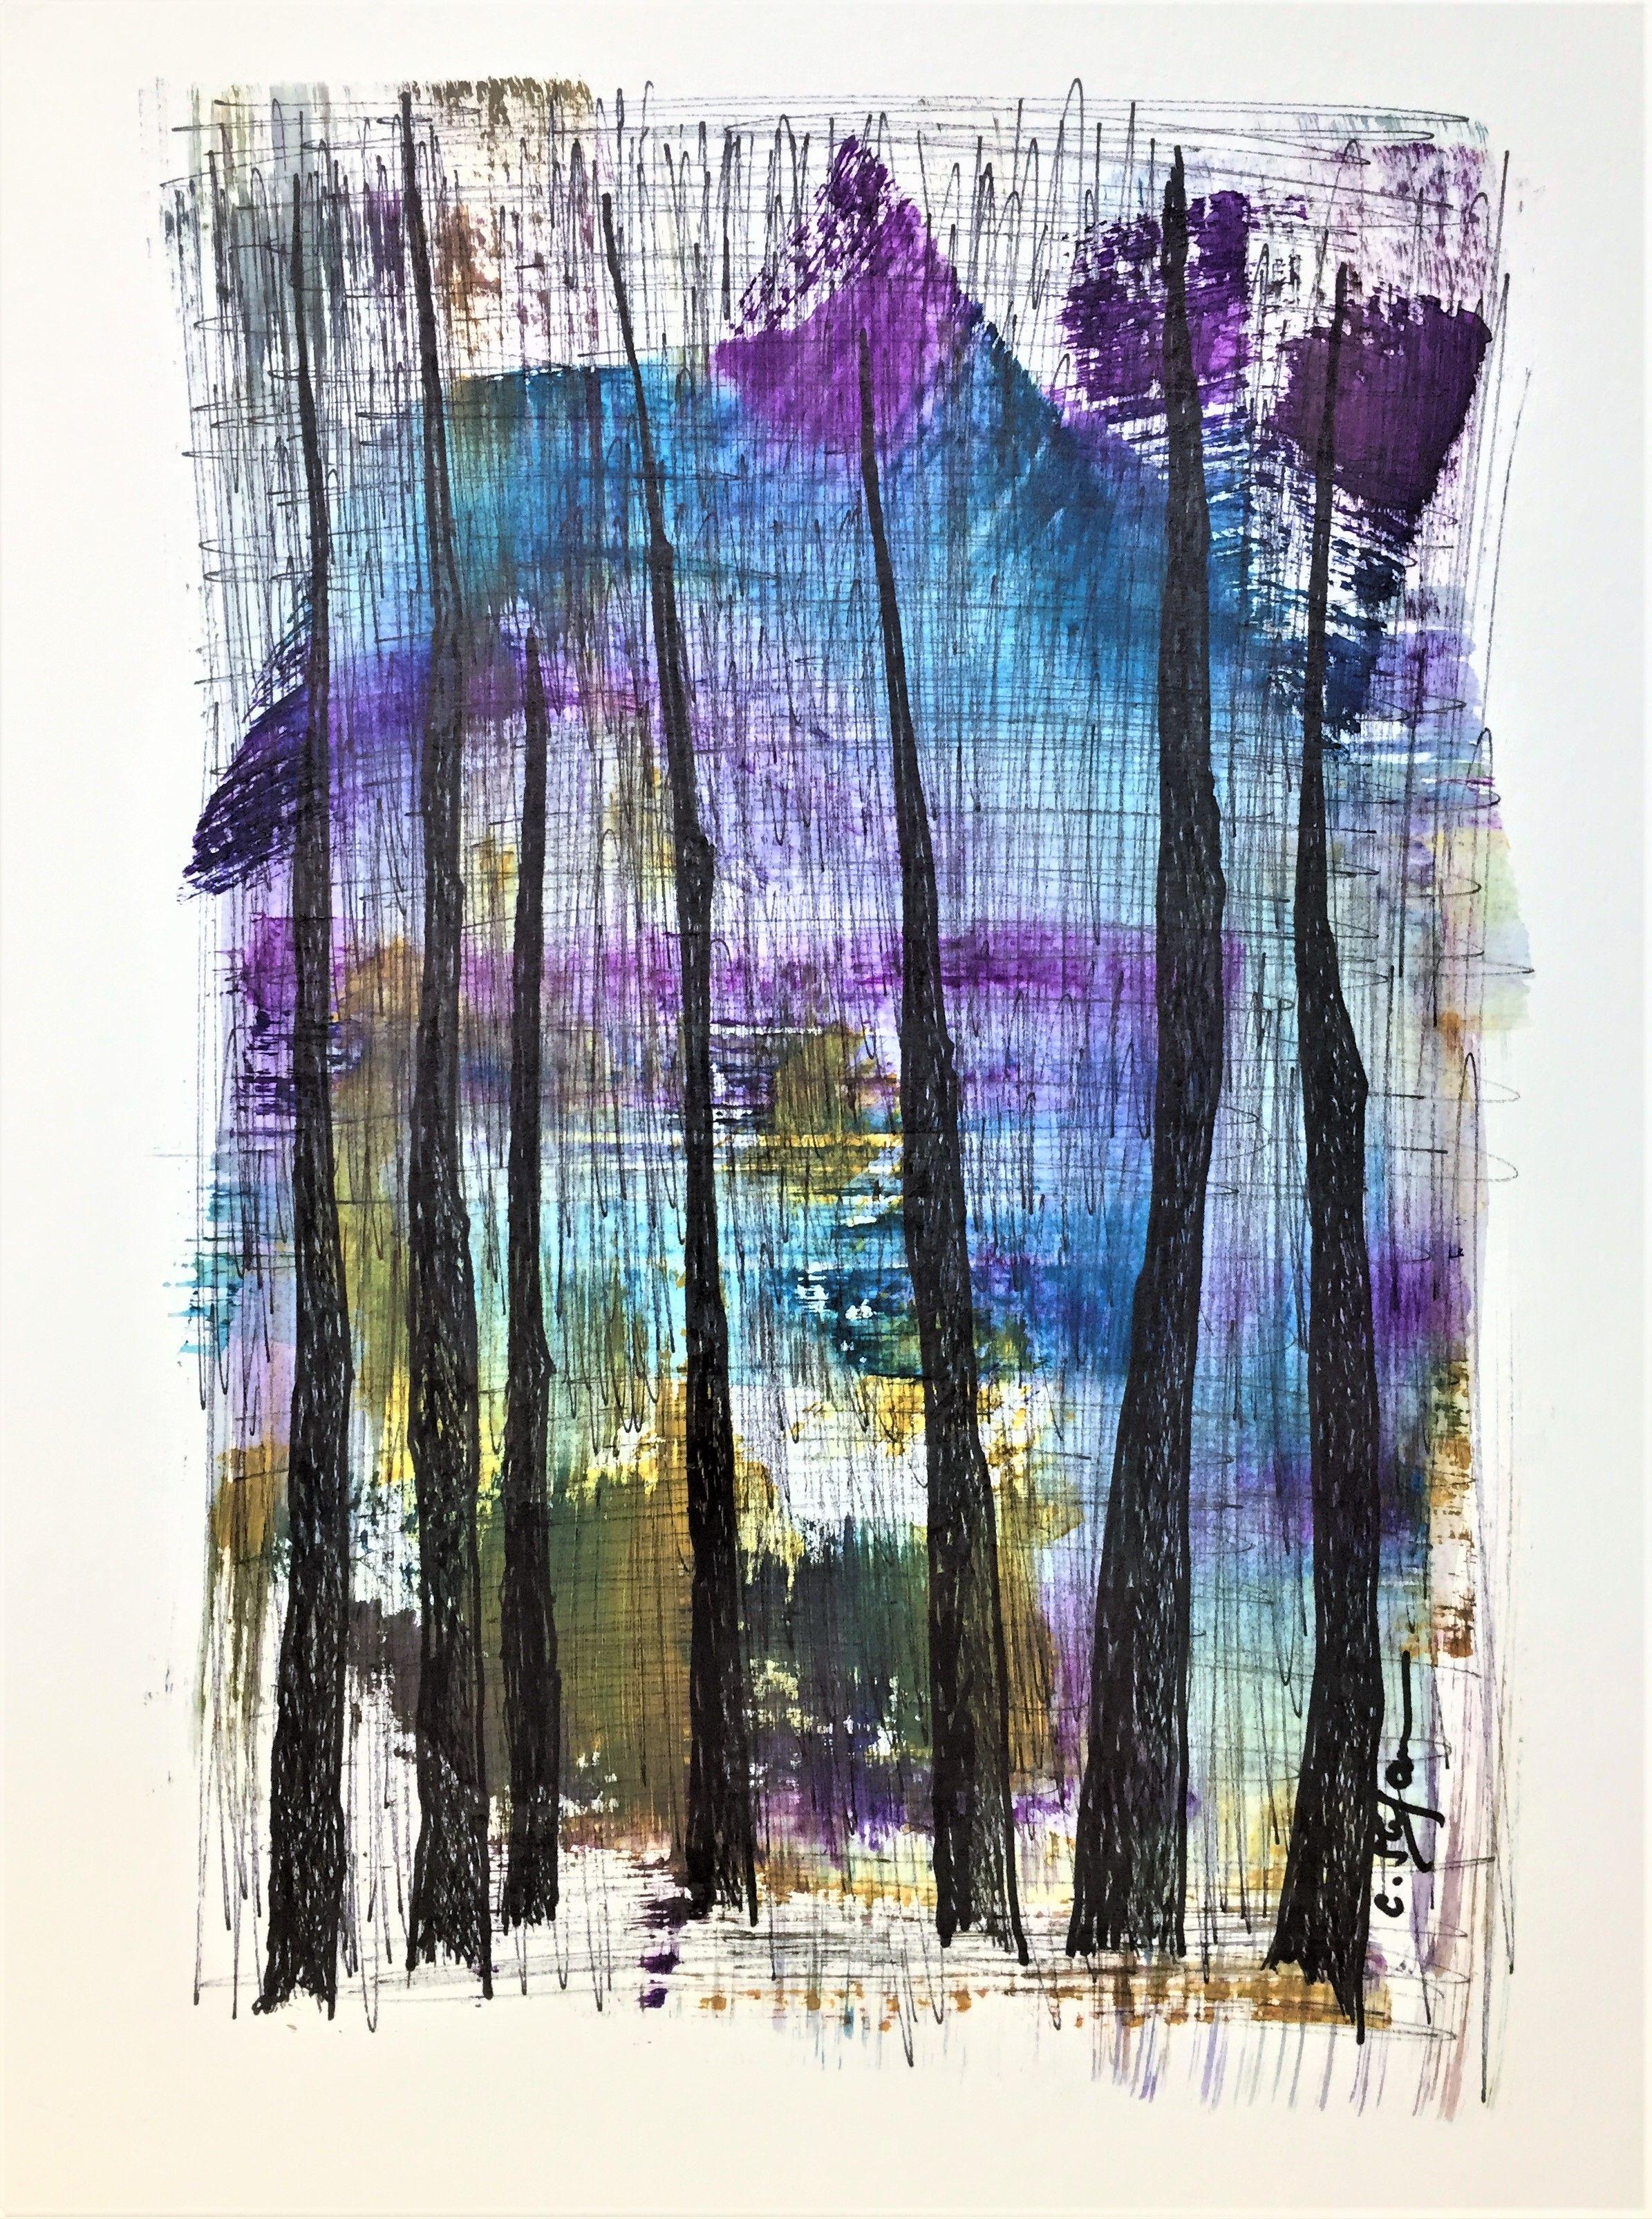 Abstract Wood #1, Mixed Media on Paper - Mixed Media Art by Cristina Stefan